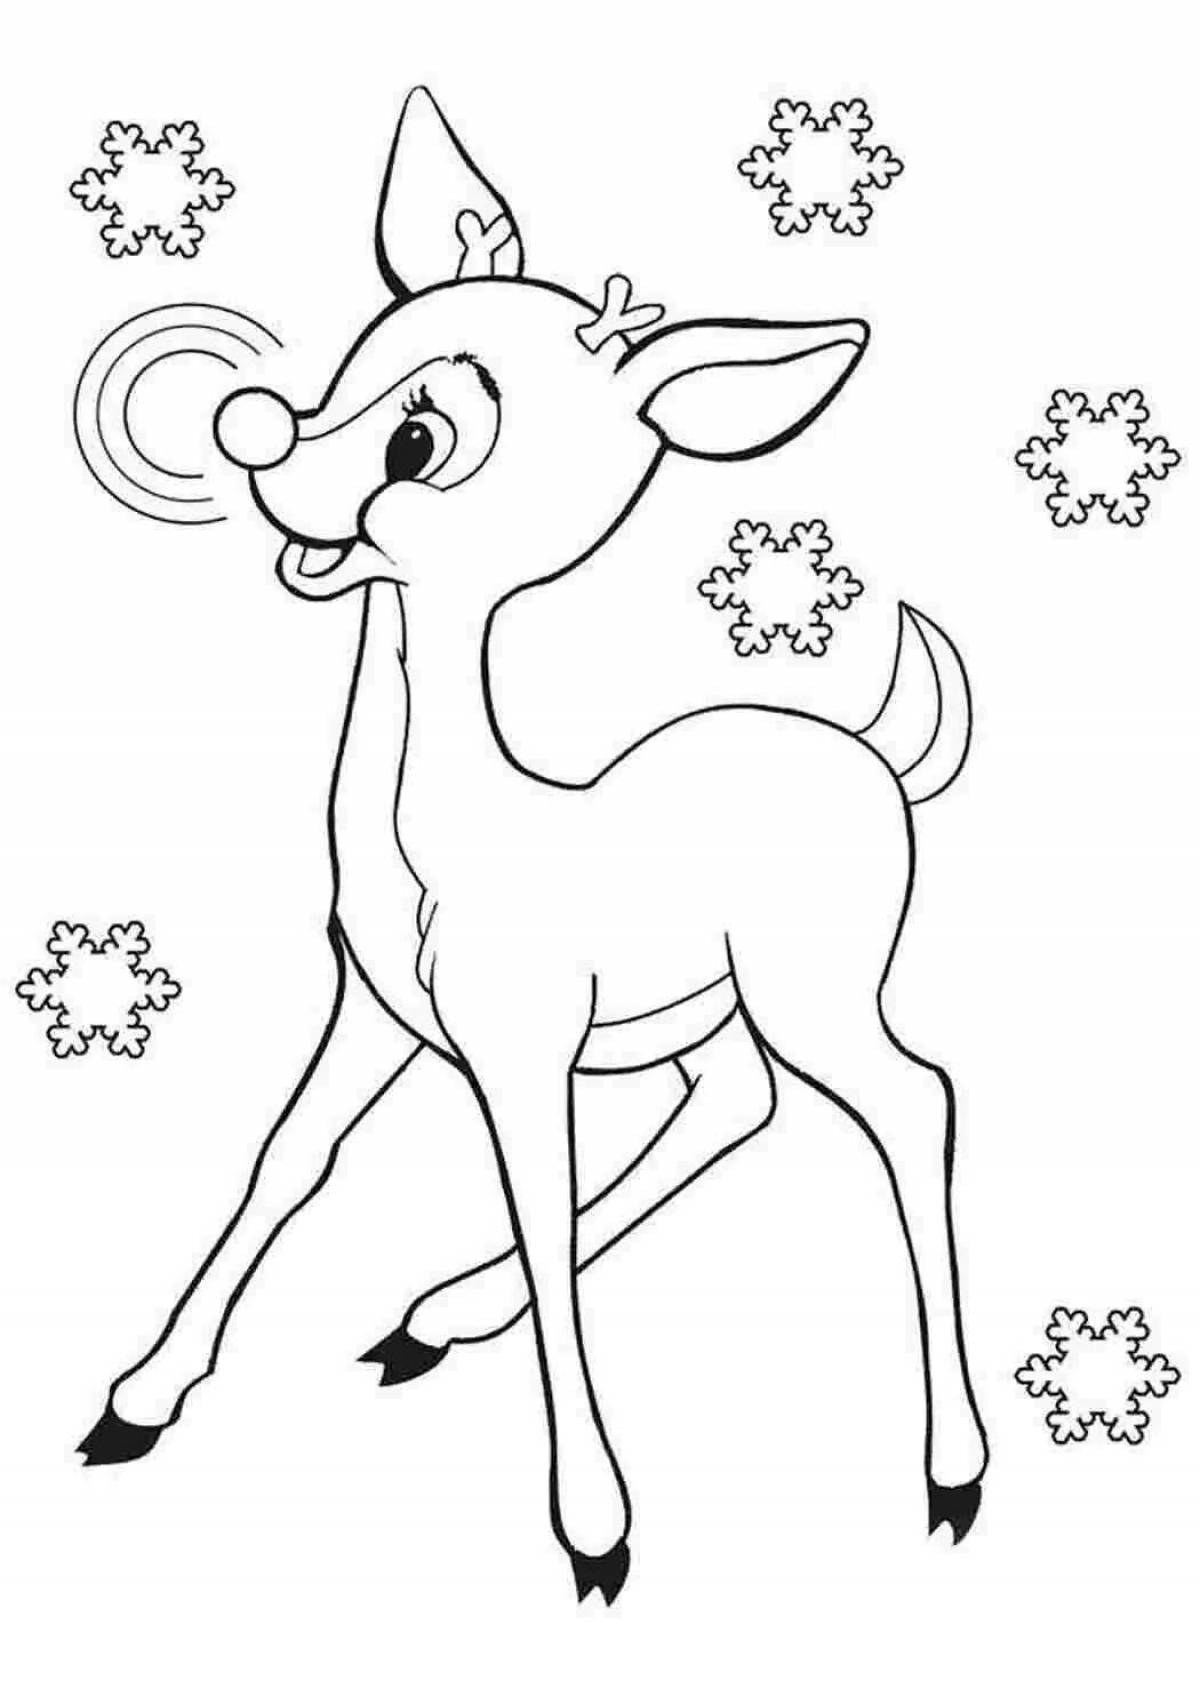 Fancy deer coloring pages for kids